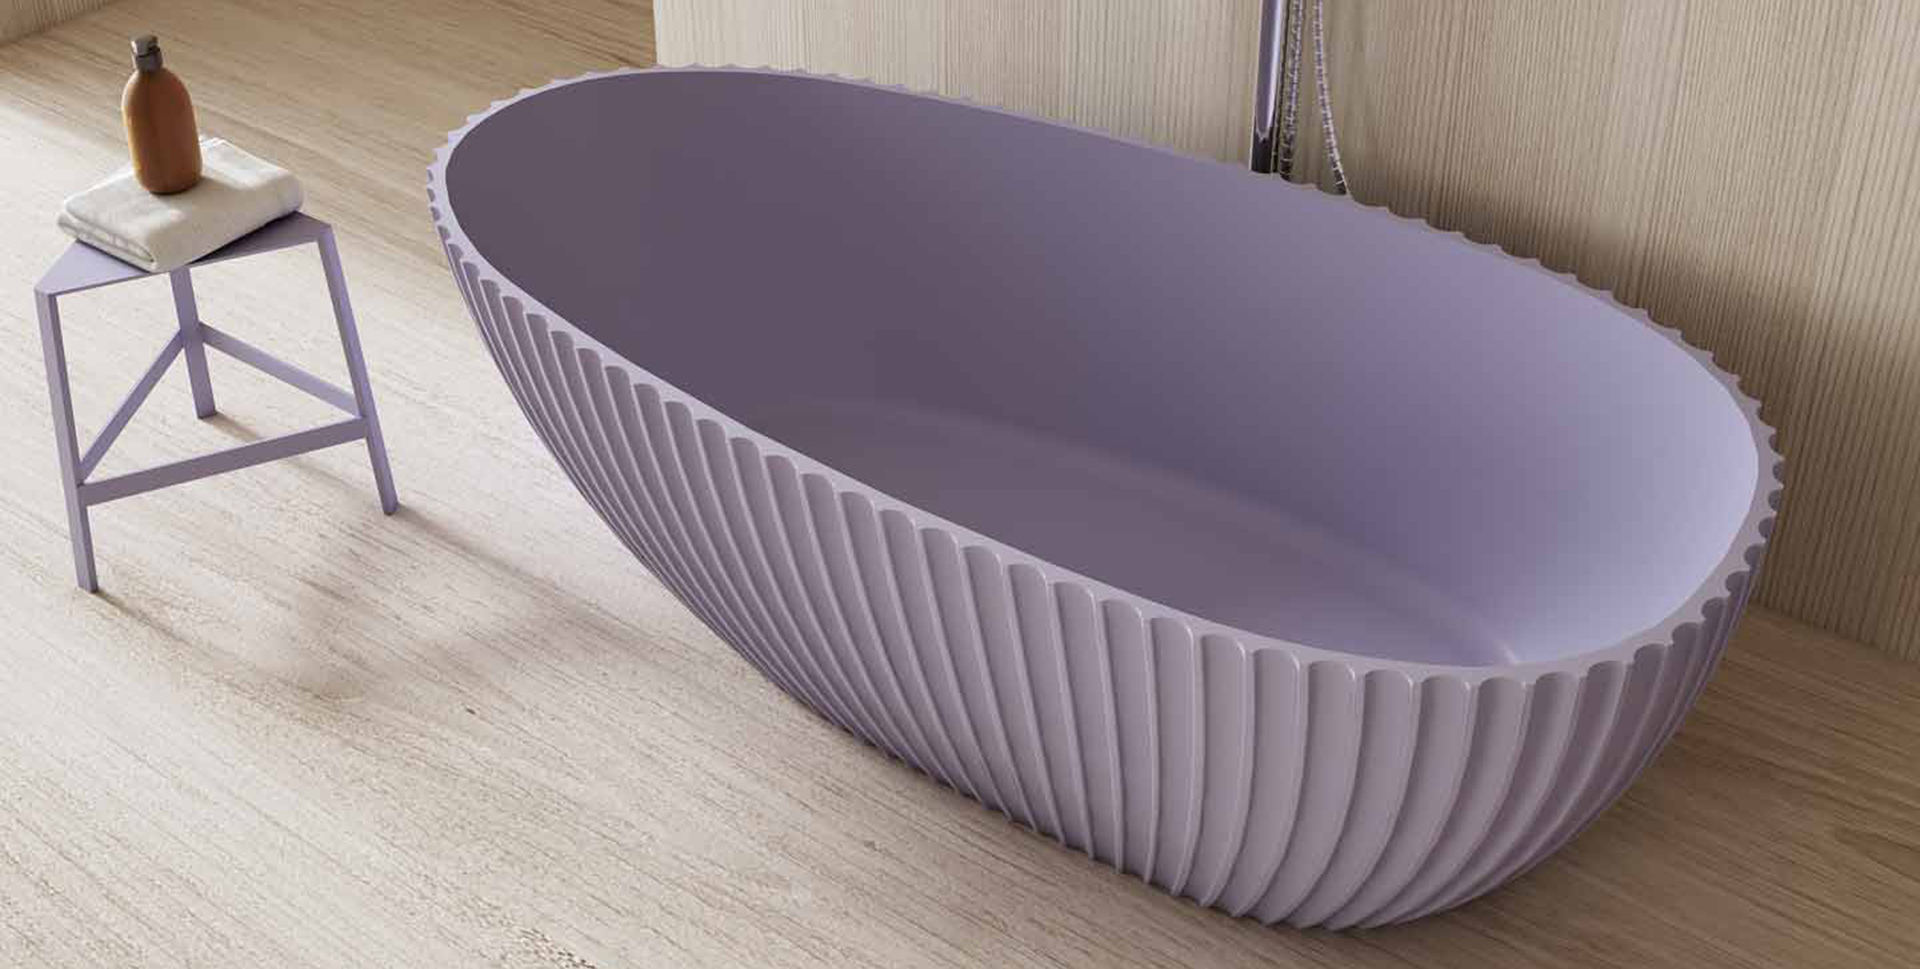 Tell you what brand of bathtub and tips to buy bathtub